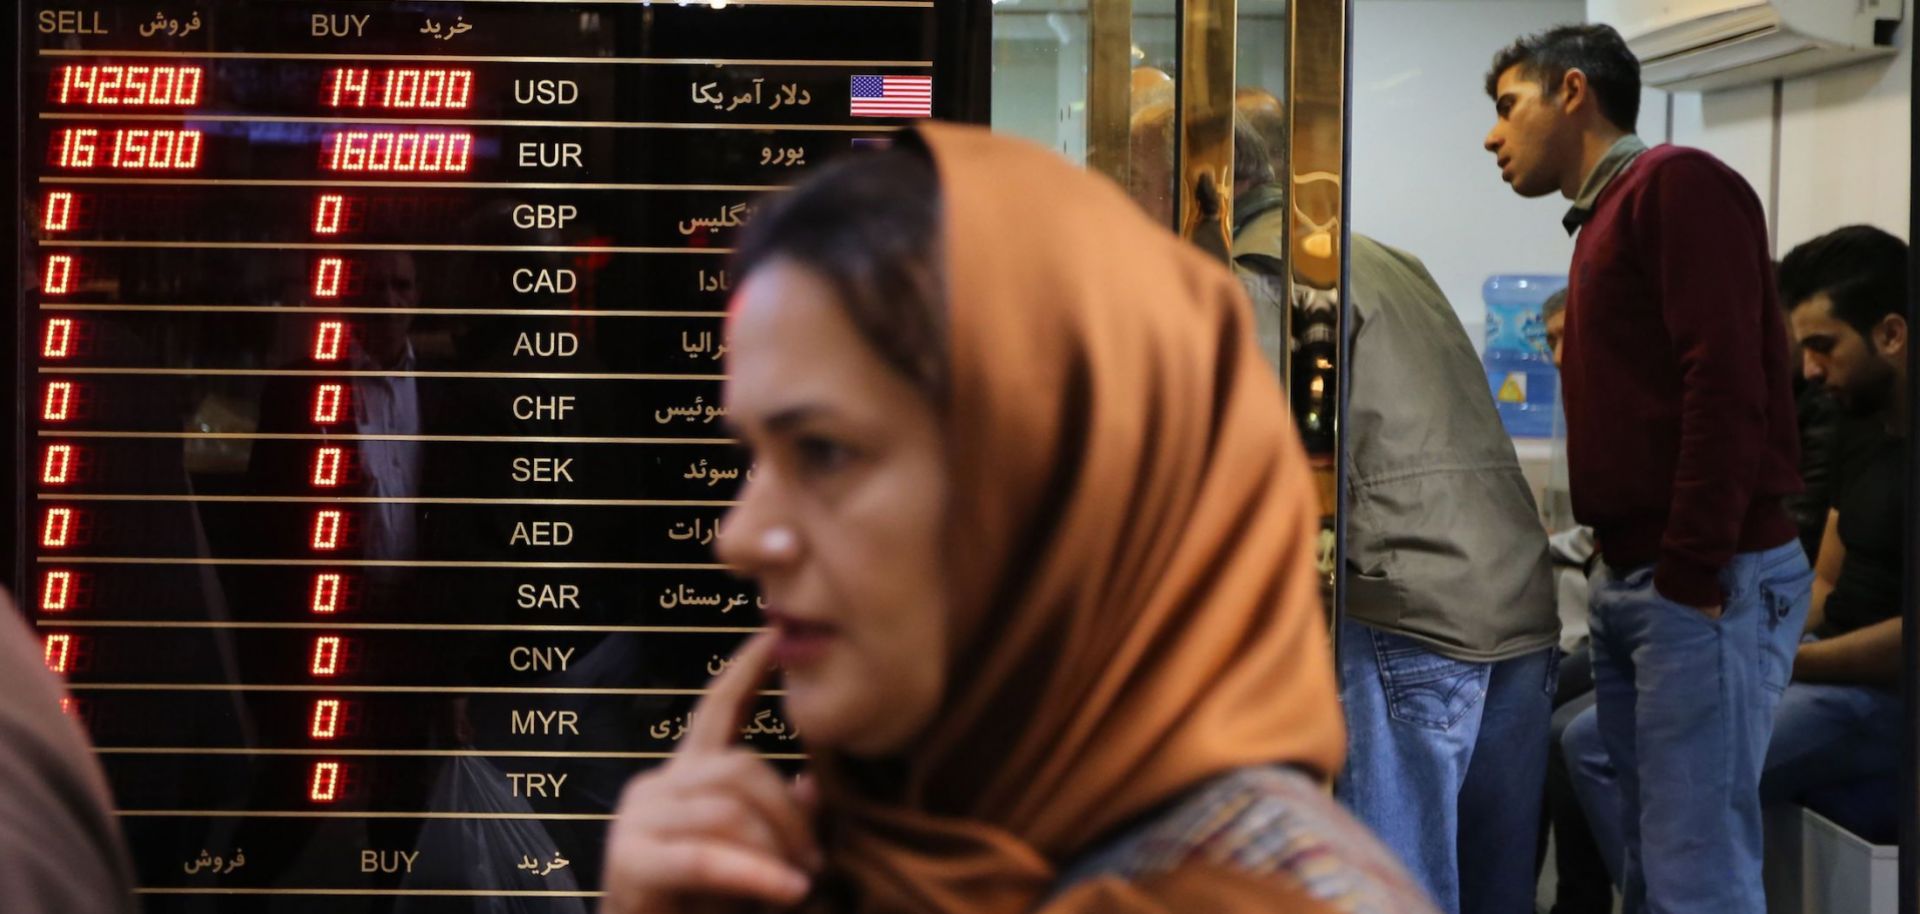 A woman walks past a currency exchange shop in the grand bazaar in Tehran, the capital of Iran, on Nov. 3, 2018.